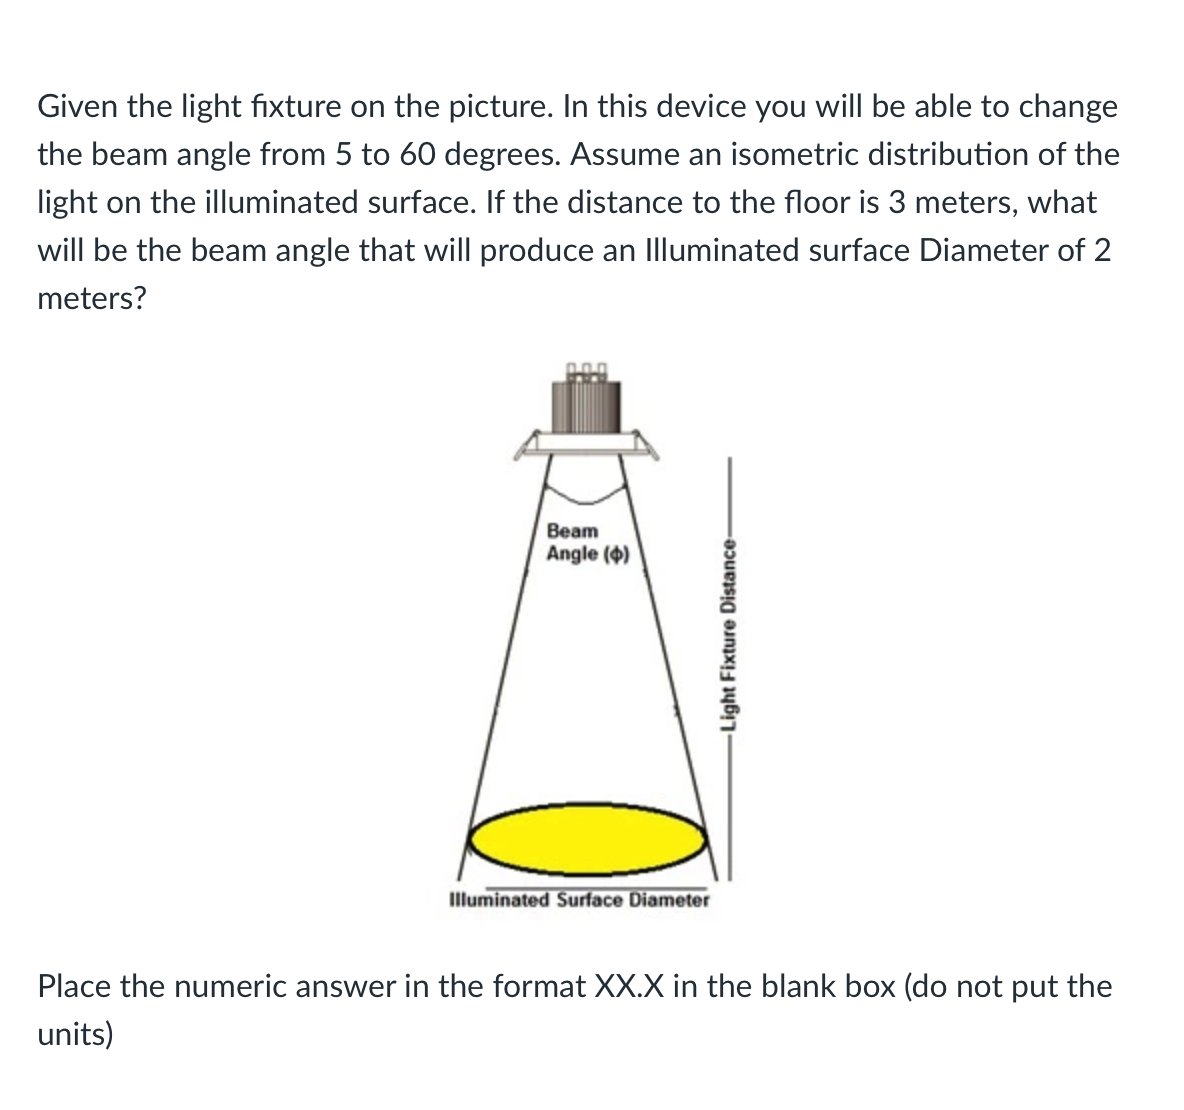 Given the light fixture on the picture. In this device you will be able to change
the beam angle from 5 to 60 degrees. Assume an isometric distribution of the
light on the illuminated surface. If the distance to the floor is 3 meters, what
will be the beam angle that will produce an Illuminated surface Diameter of 2
meters?
Beam
Angle (4)
Illuminated Surface Diameter
Place the numeric answer in the format XX.X in the blank box (do not put the
units)
Light Fixture Distance-
